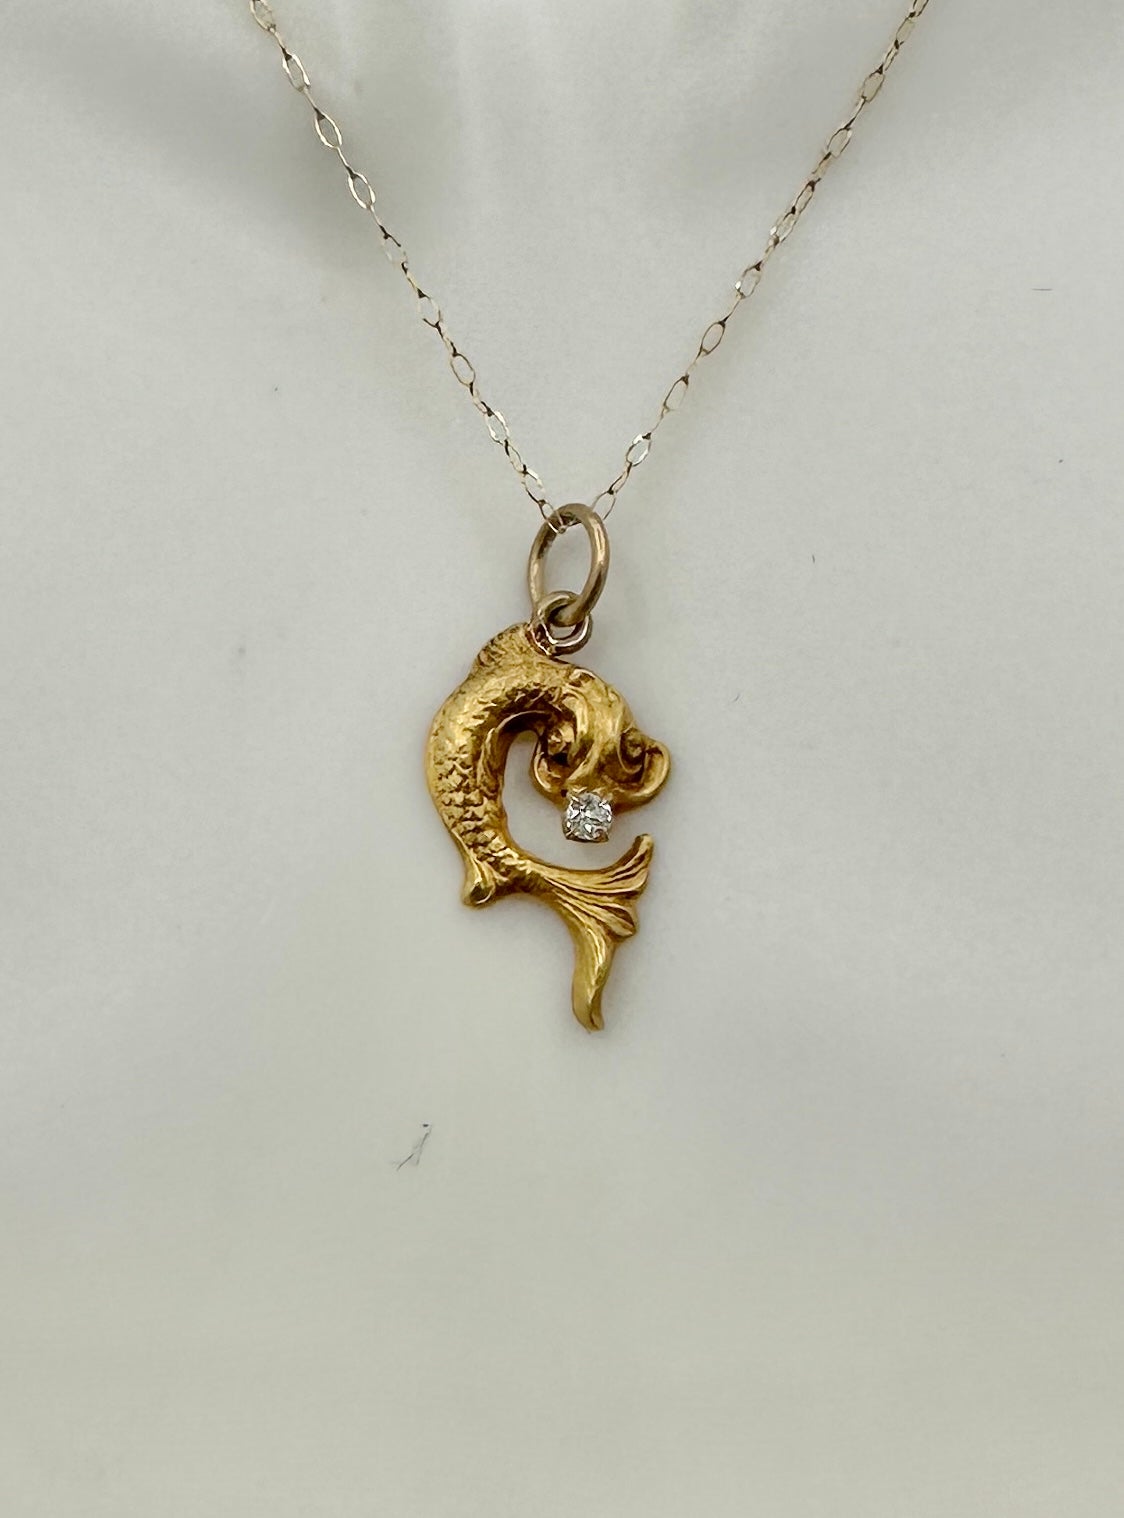 THIS IS A STUNNING BEAUX ARTS RENAISSANCE REVIVAL ART NOUVEAU GOLD PENDANT OF A MYTHICAL FISH SEA CREATURE DRAGON WITH A STUNNING ANTIQUE OLD MINE CUT DIAMOND IN ITS MOUTH.
This is a beautiful and rare Beaux Arts - Art Nouveau - Belle Epoque pendant